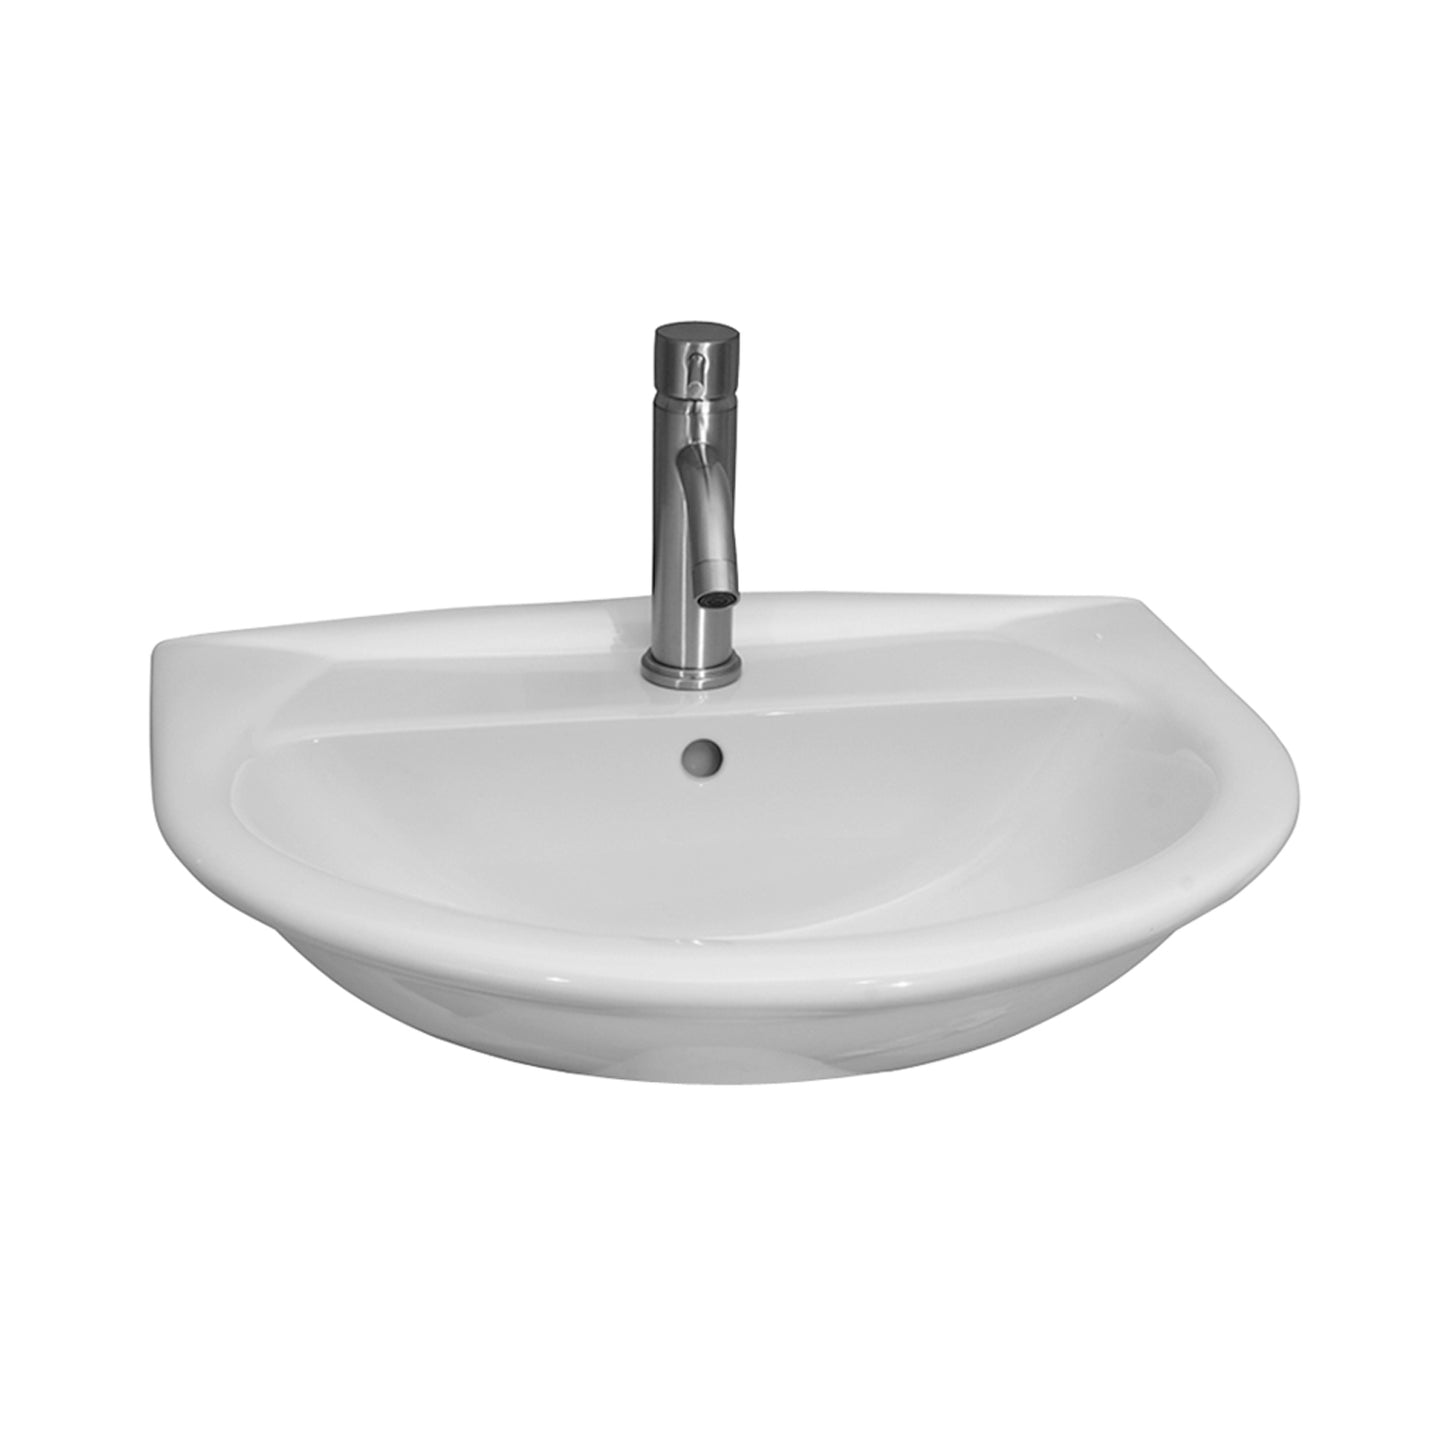 Karla 550 Wall Hung Sink with 1 Faucet Hole and Overflow White